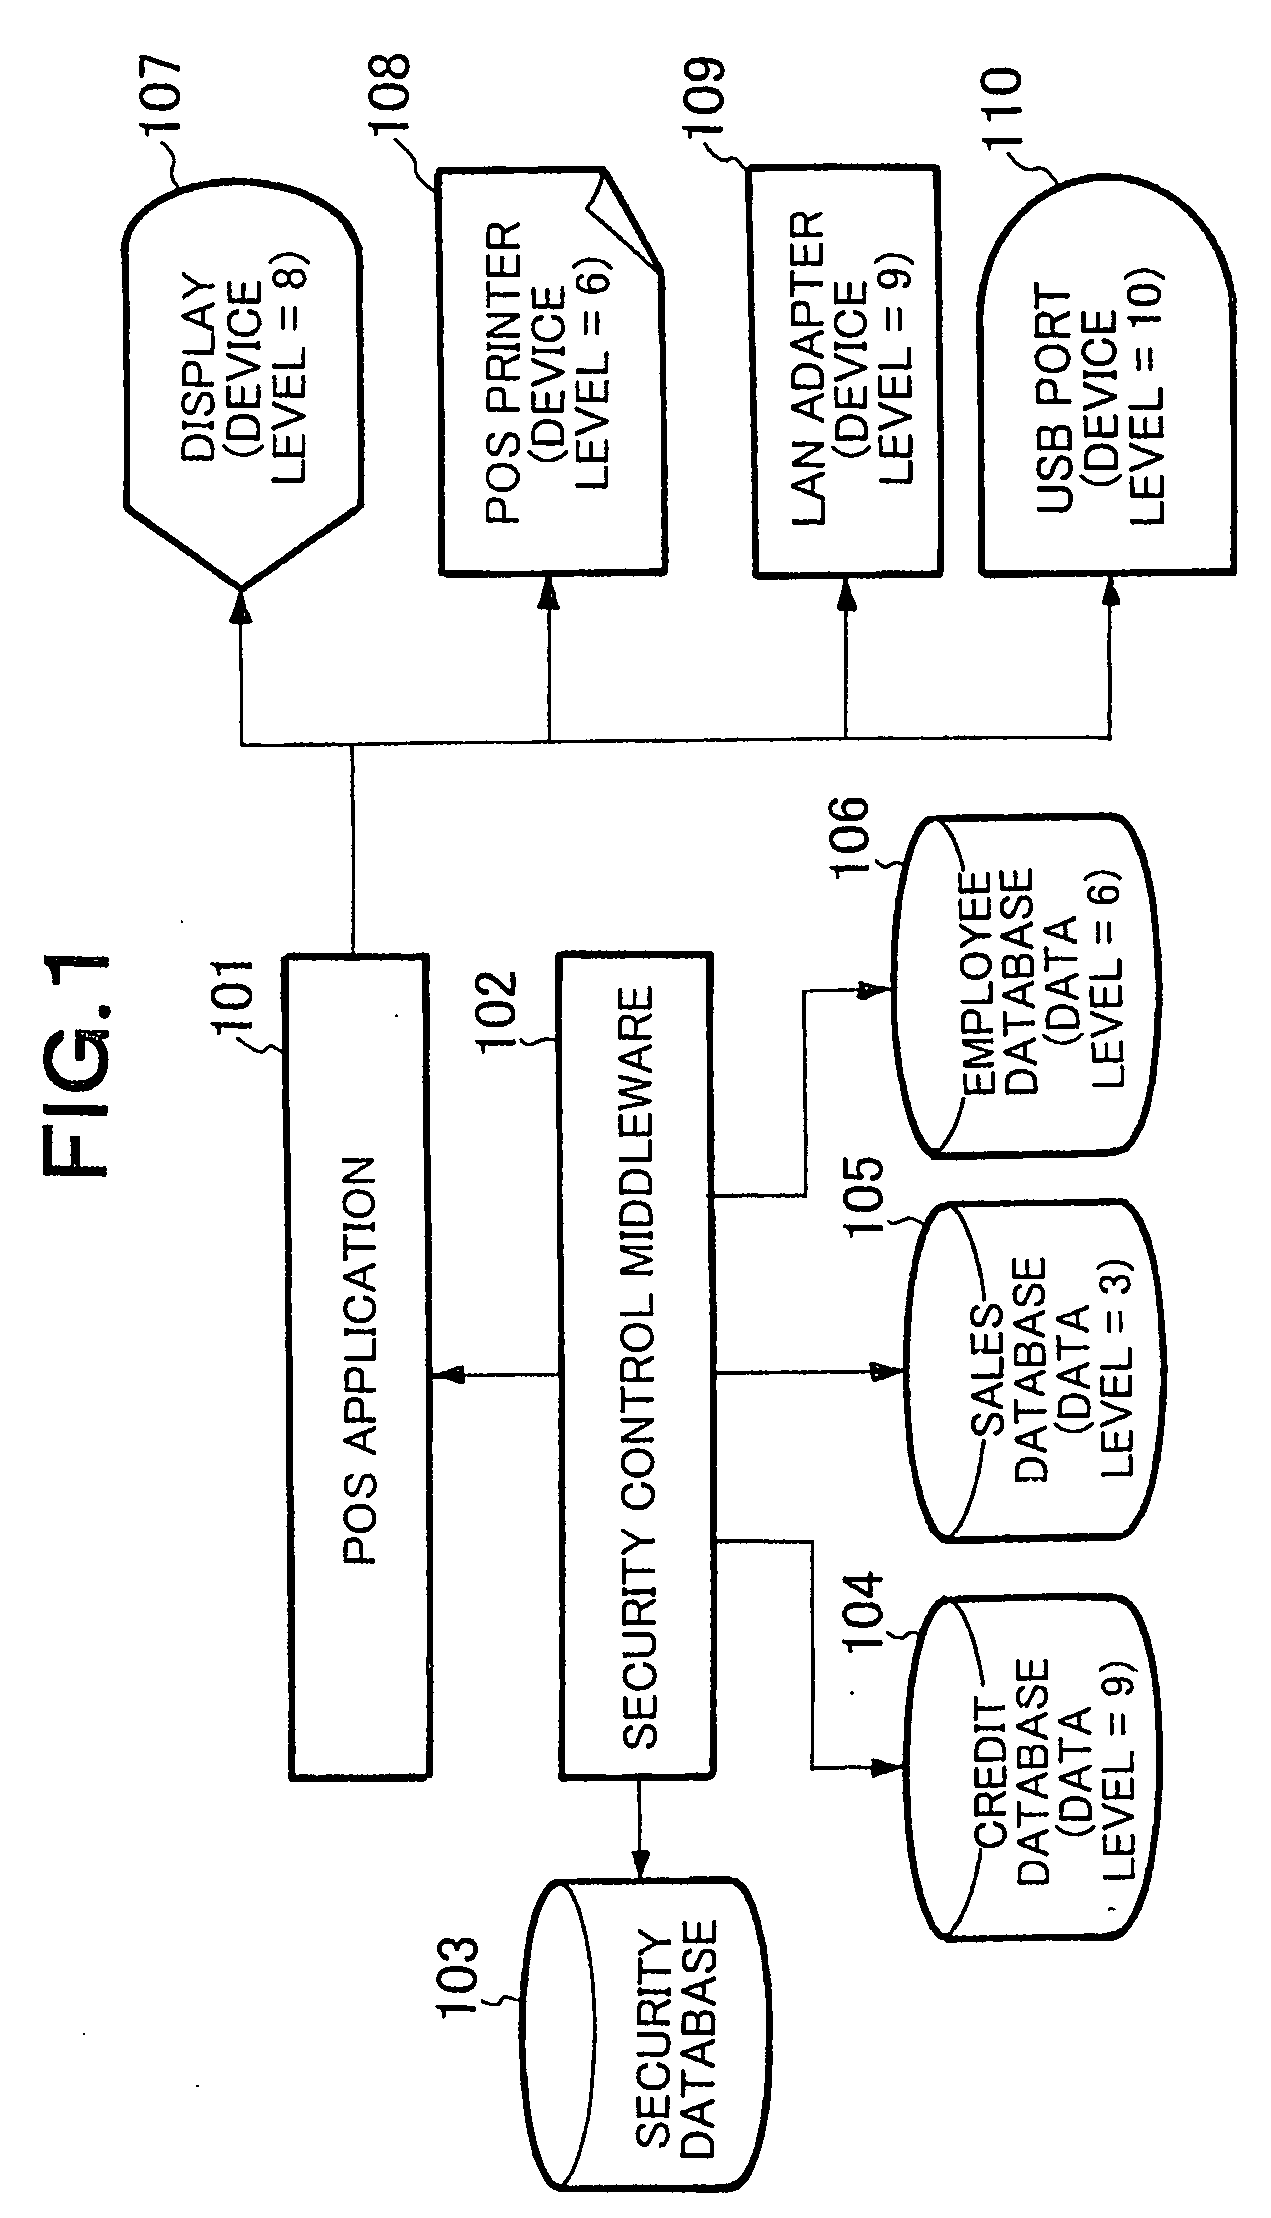 Method and system for controlling data output